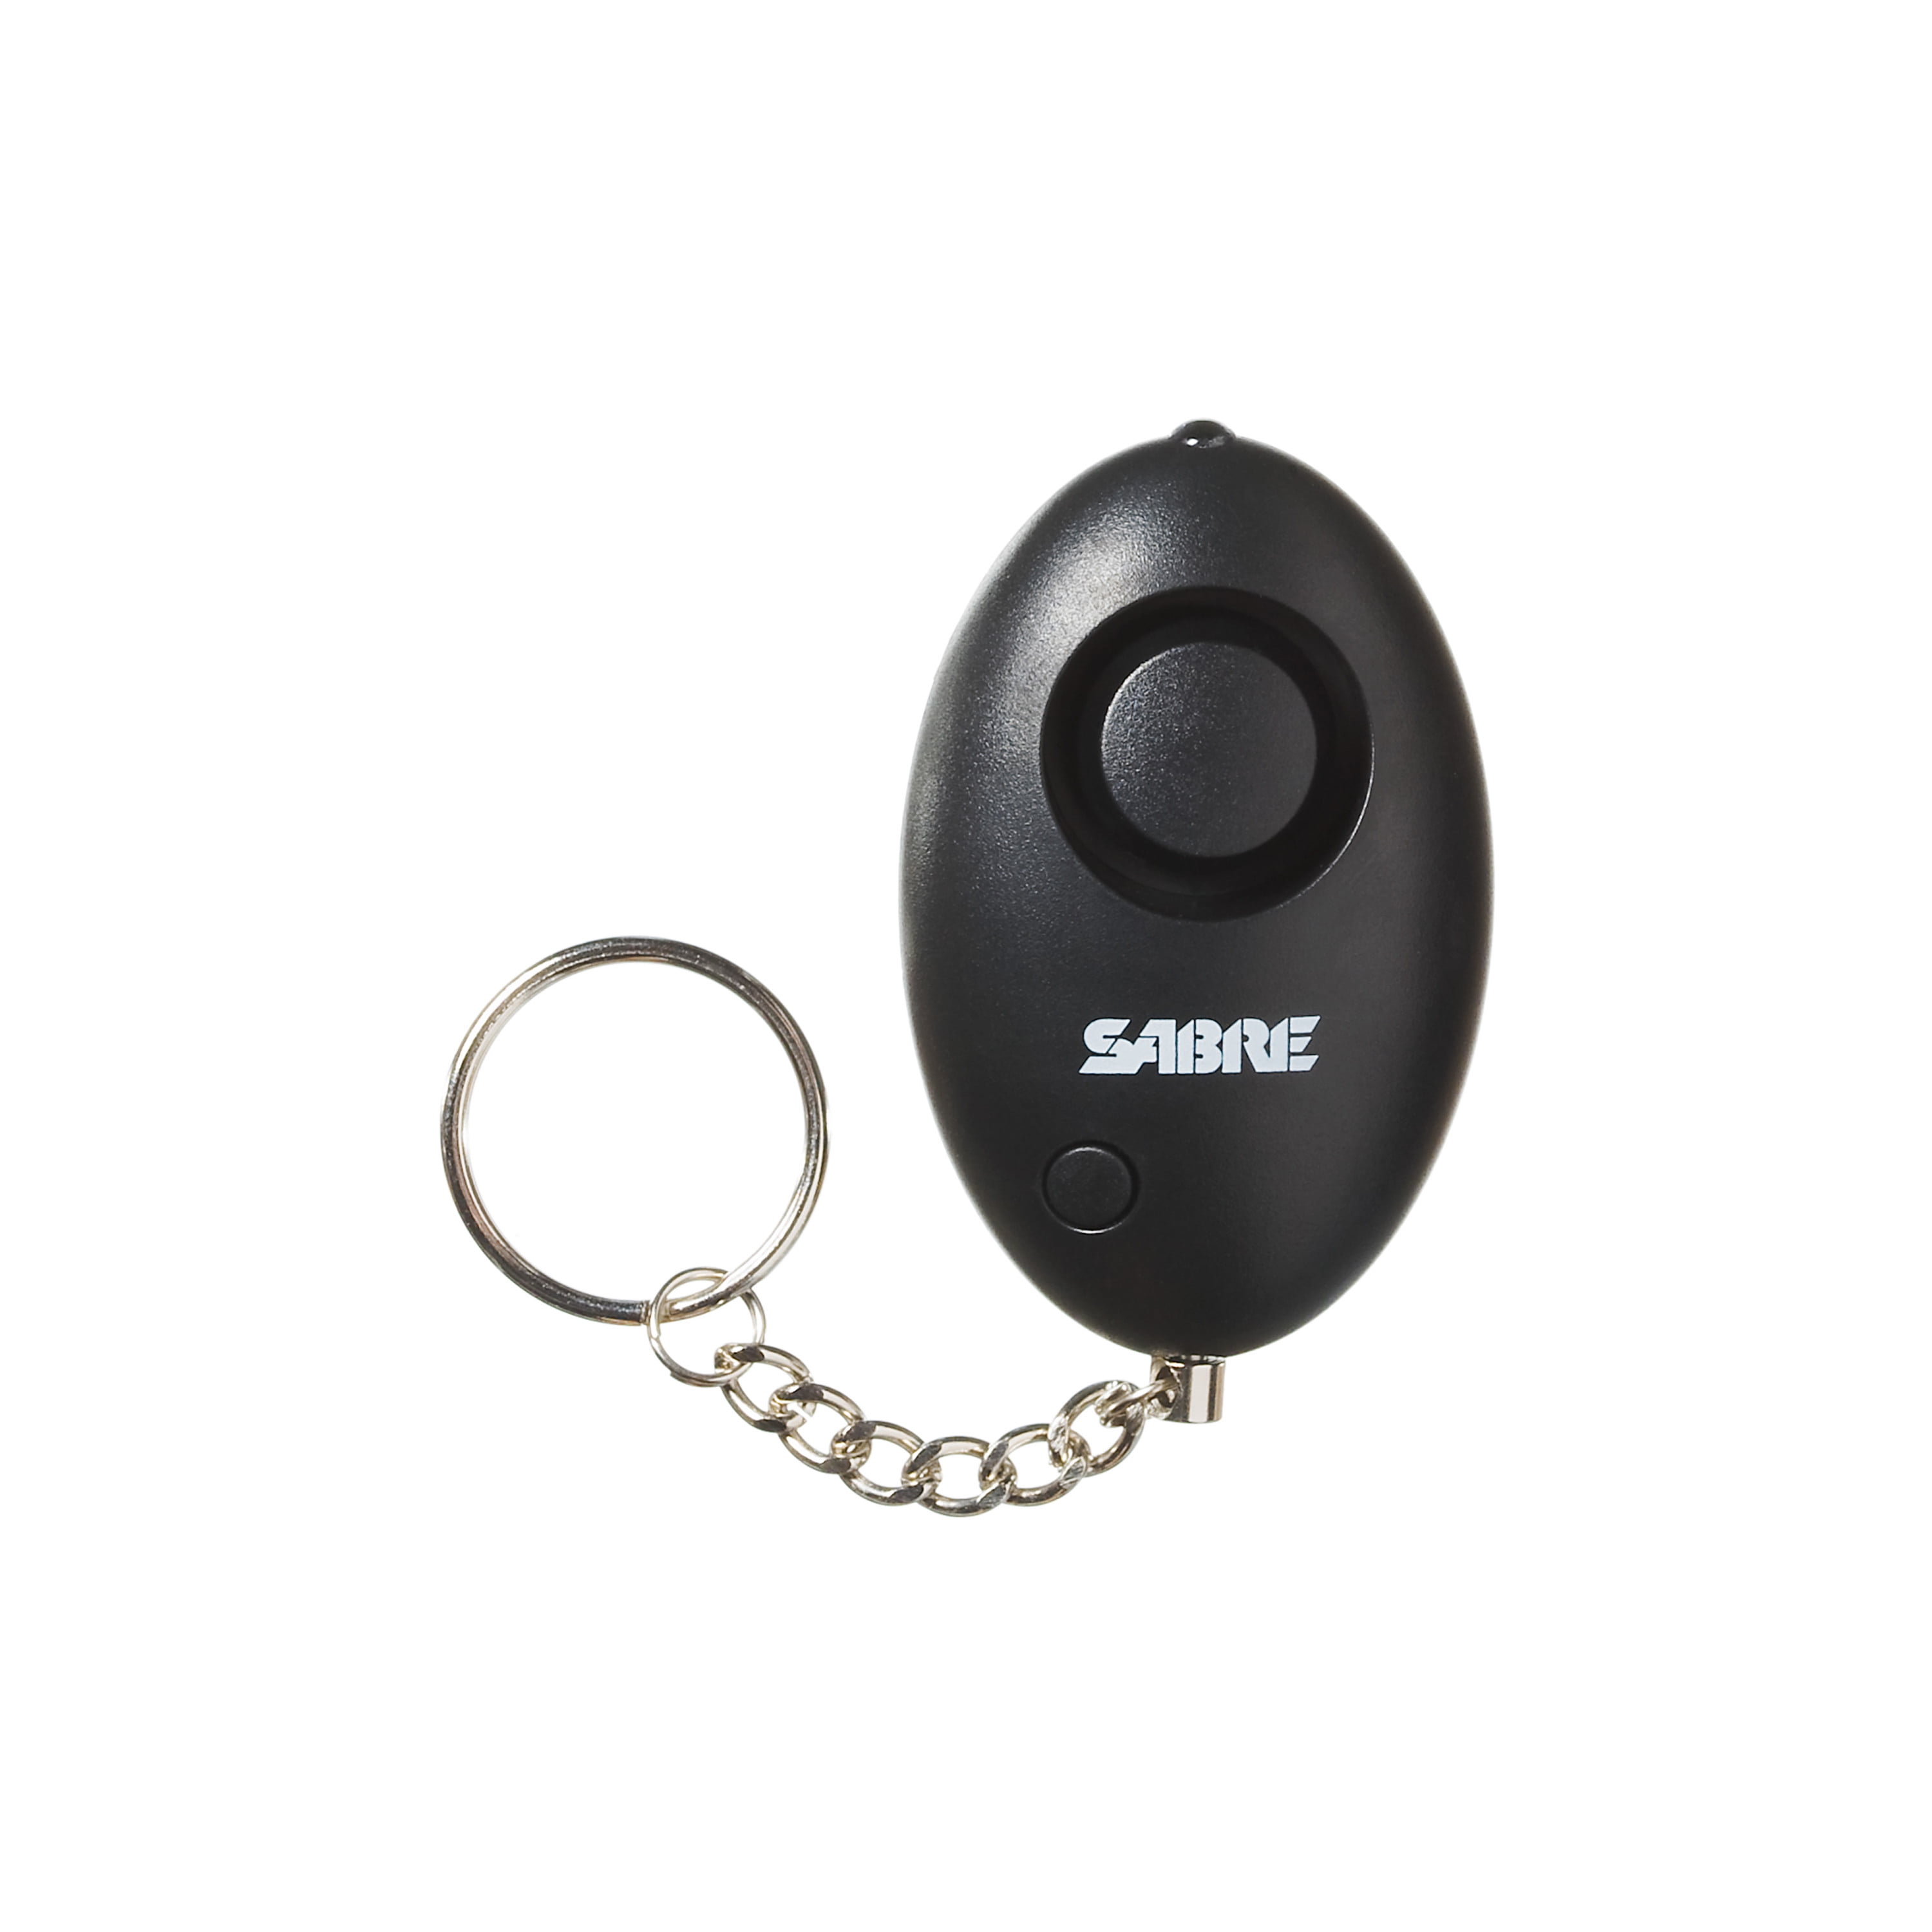 Tactical Advantage Security Warning Keychain Alarm with Motion Detector